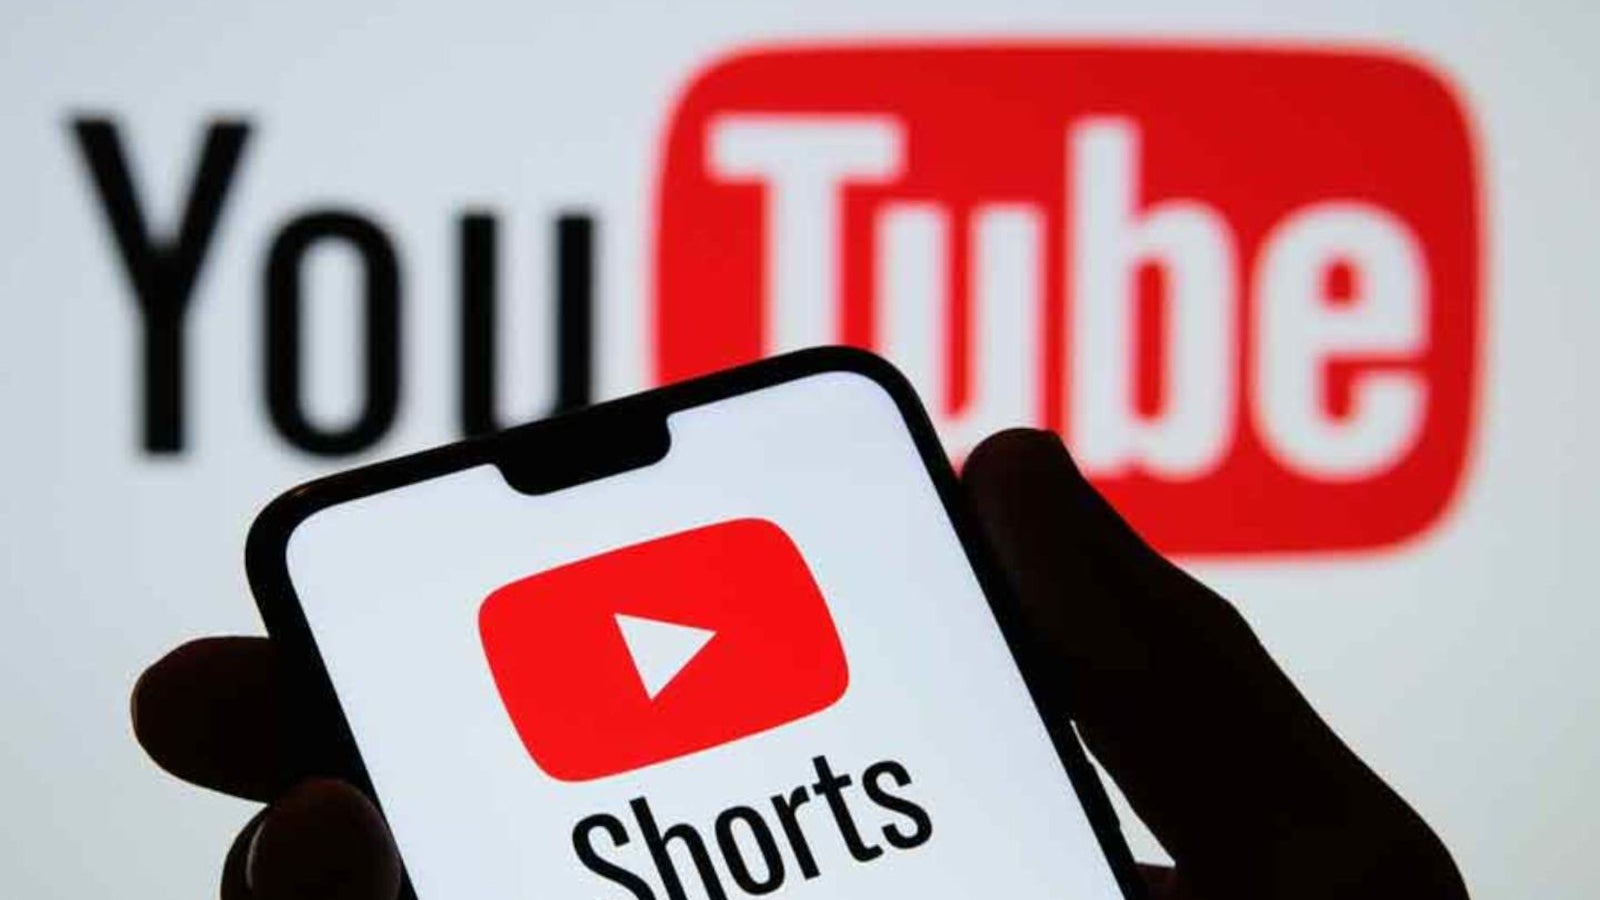 What Are YouTube Shorts? - PhoneArena